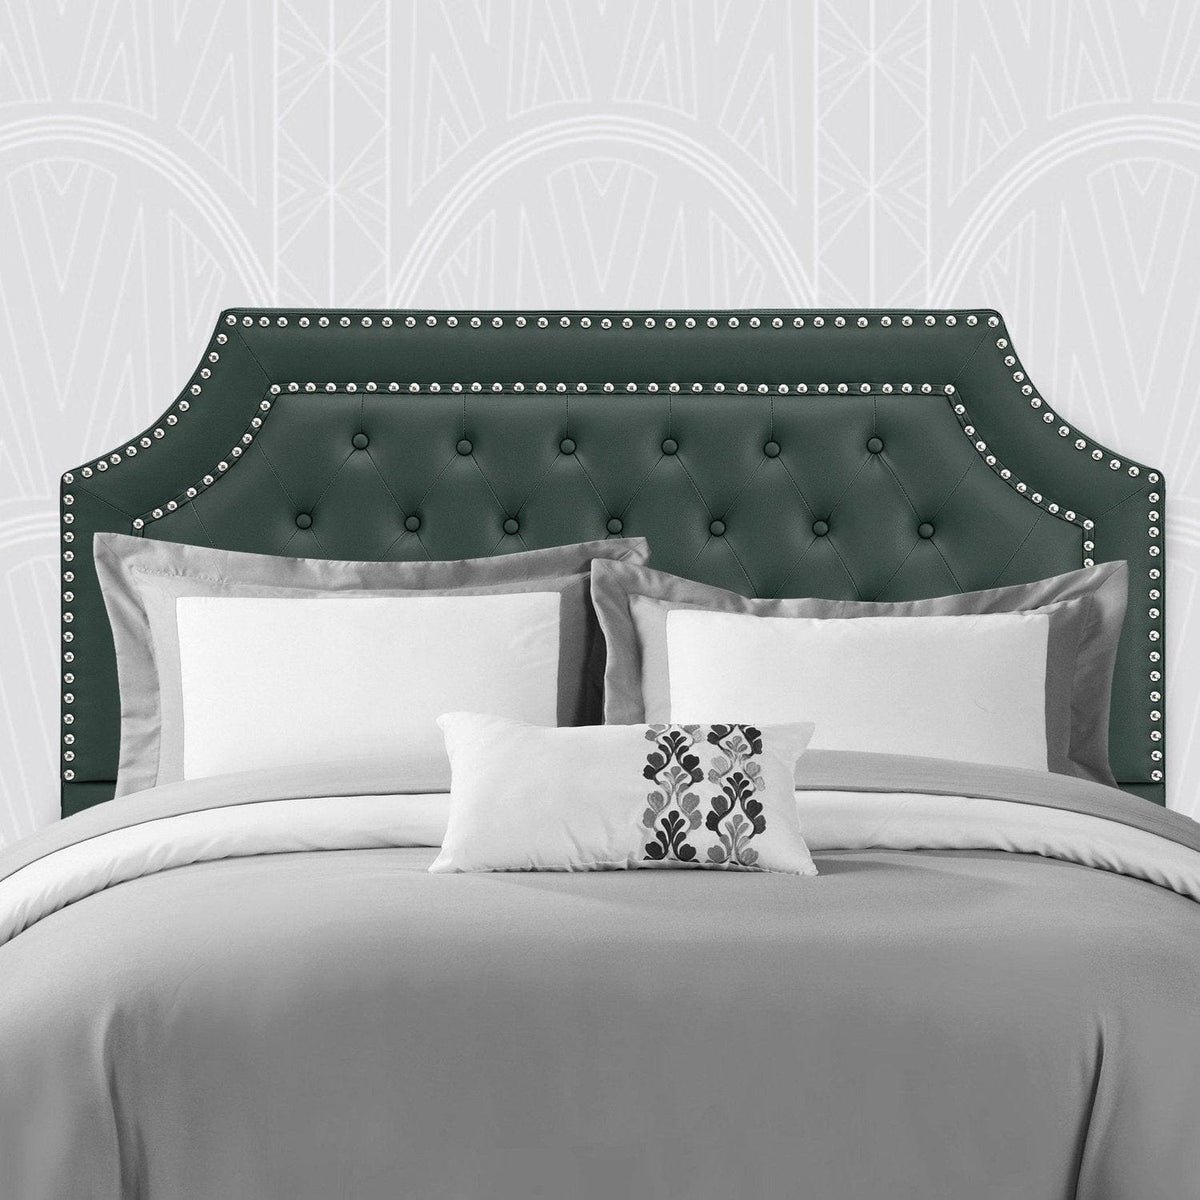 Iconic Home Malone Tufted Faux Leather Headboard For Bed Green